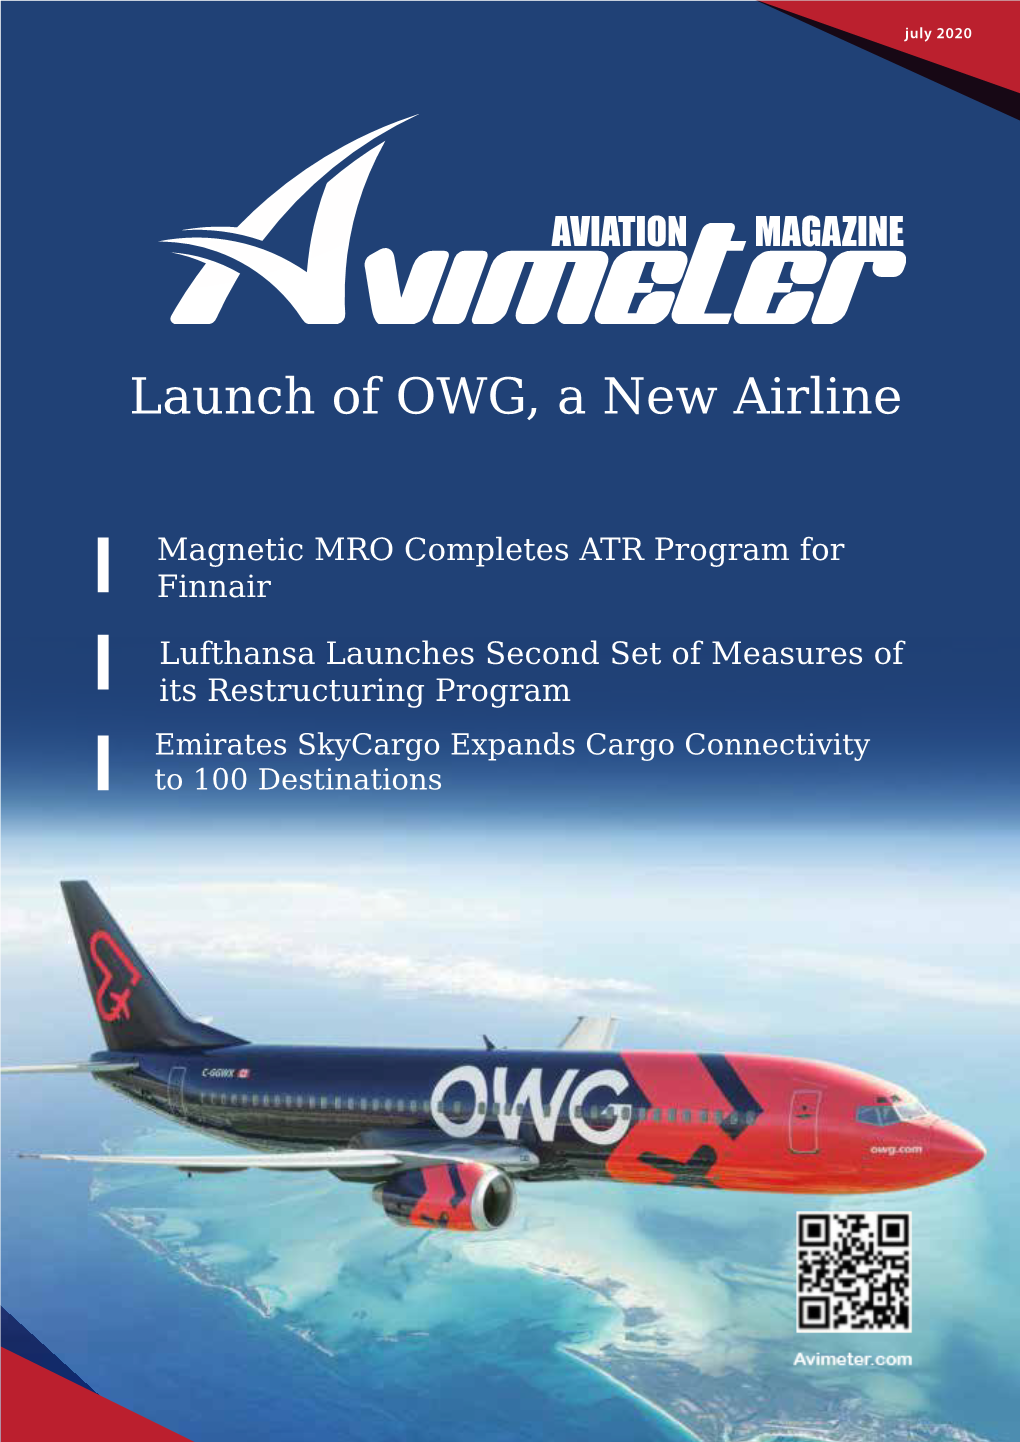 Launch of OWG, a New Airline